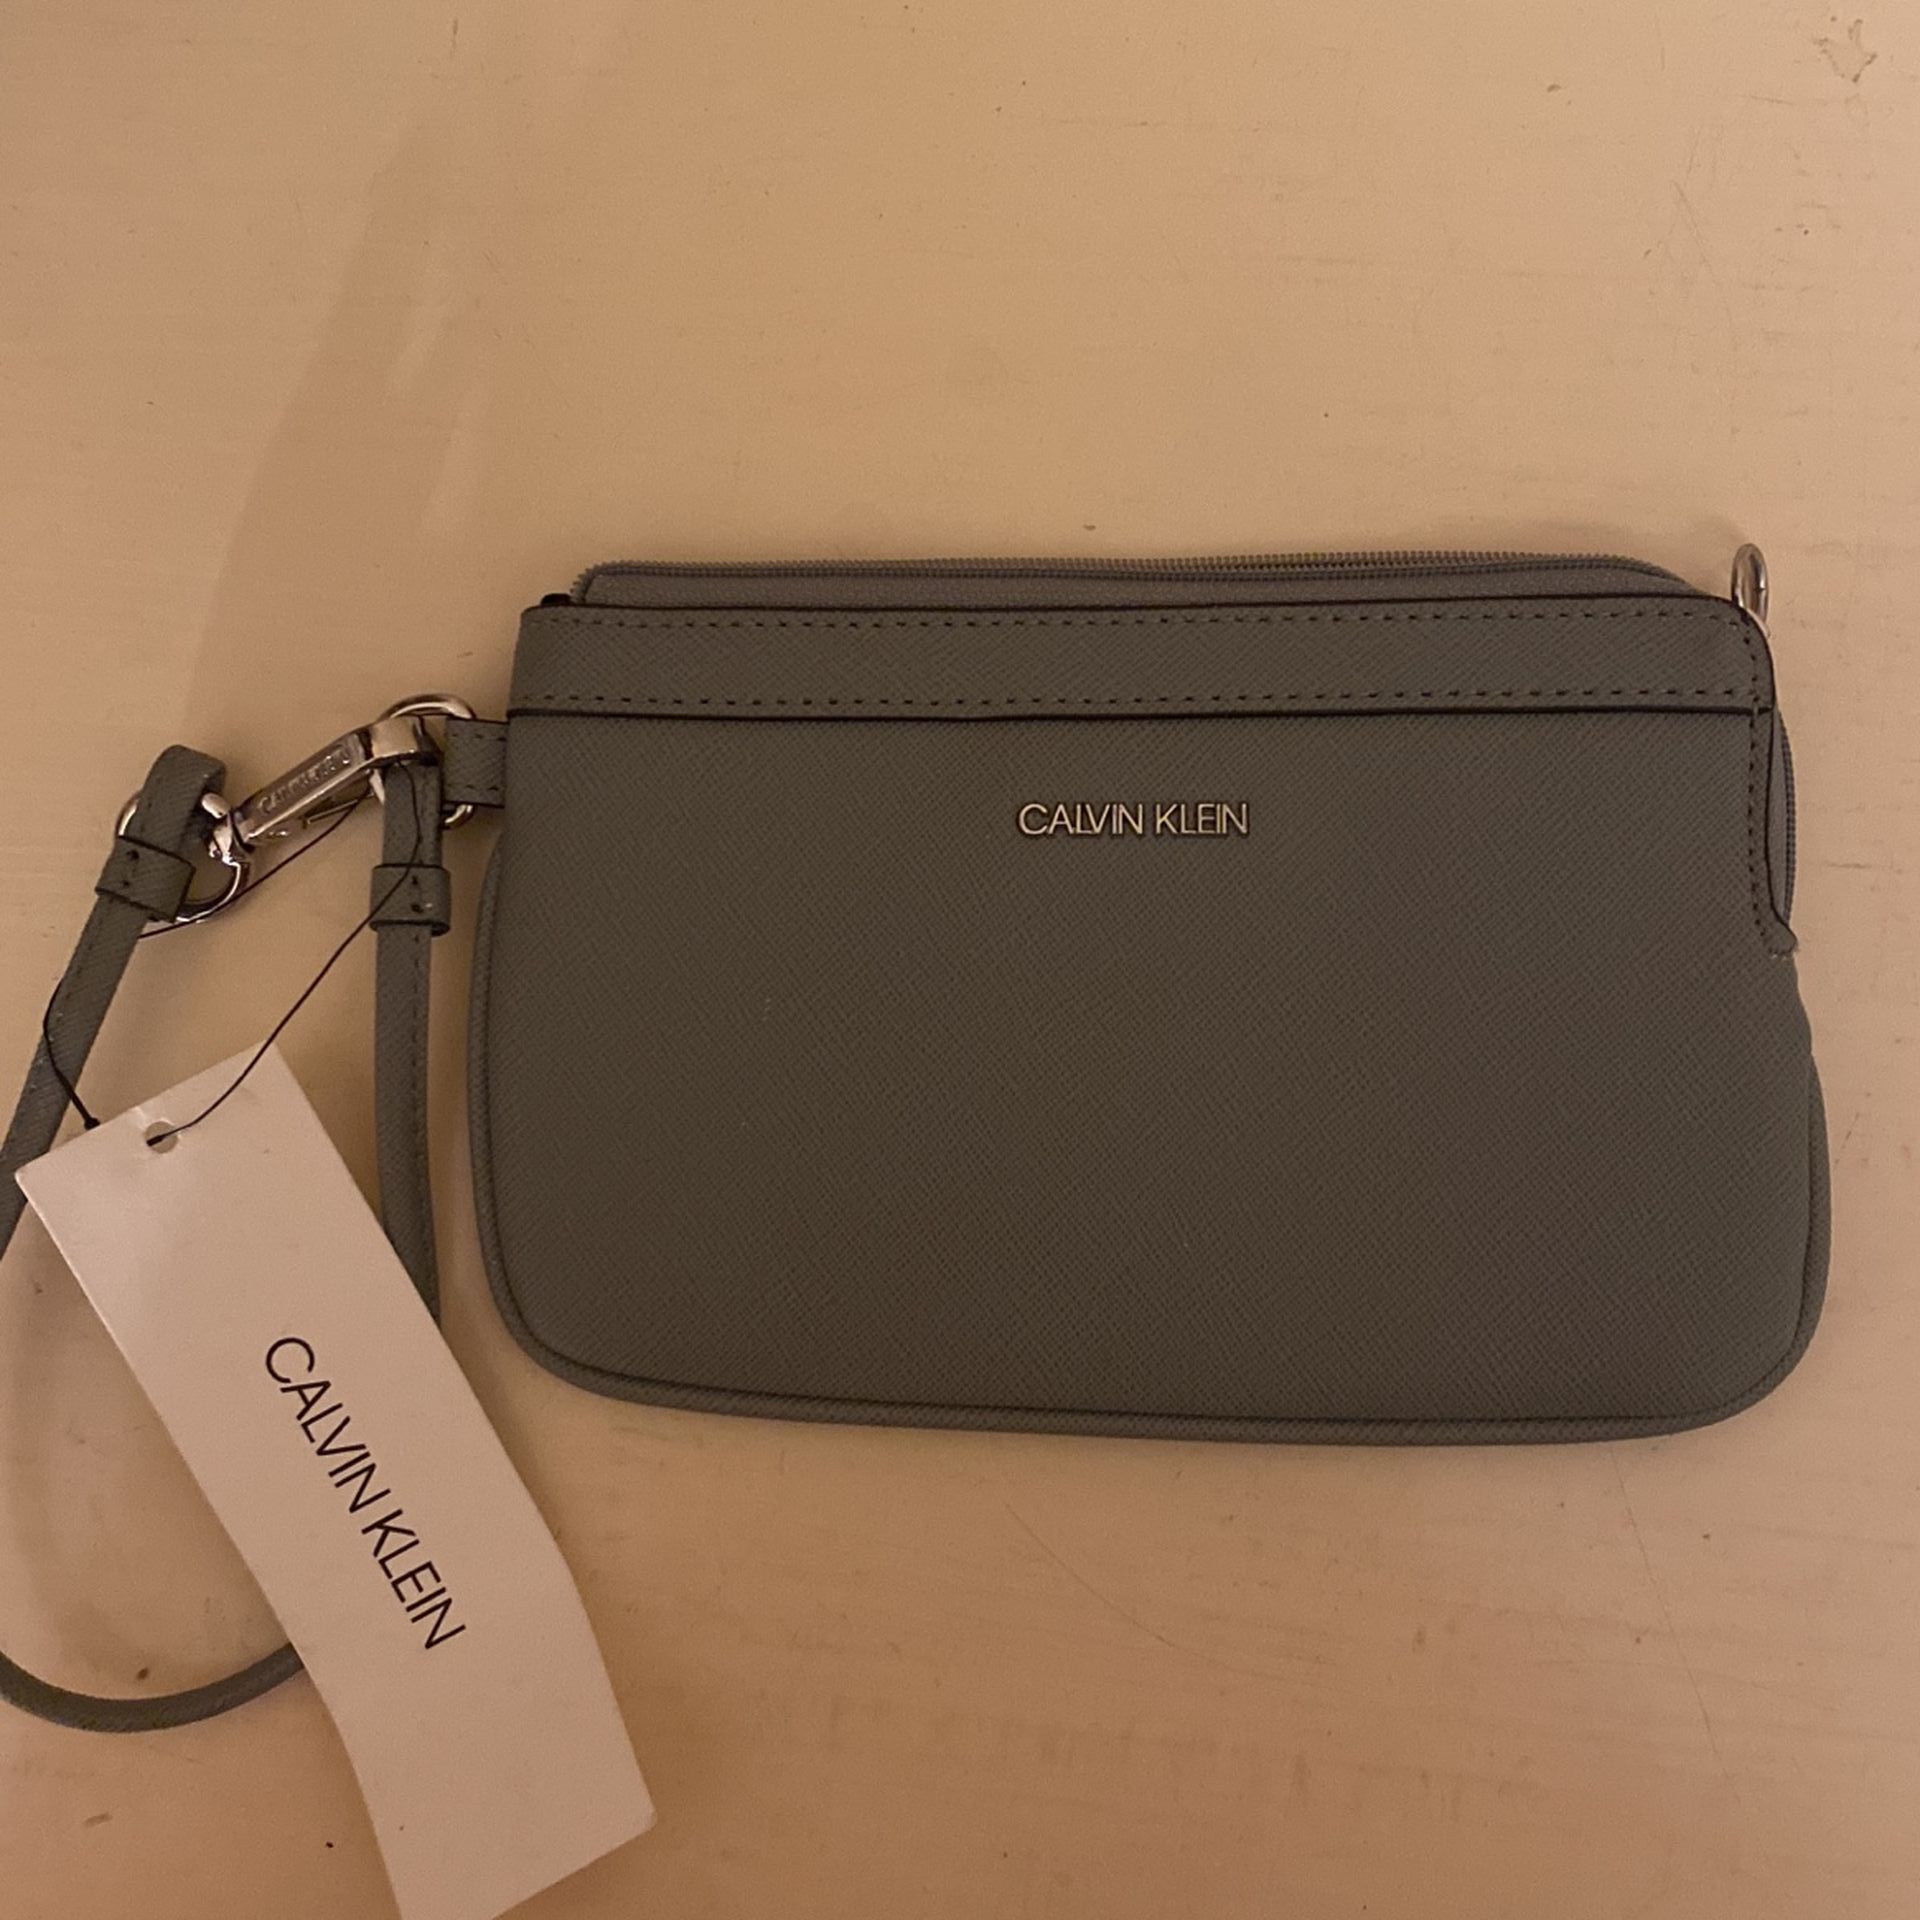 Calvin Klien Grey Wristlet Wallet With Removable Strap  For Wallet Use $5 C My Other Wallets Ty